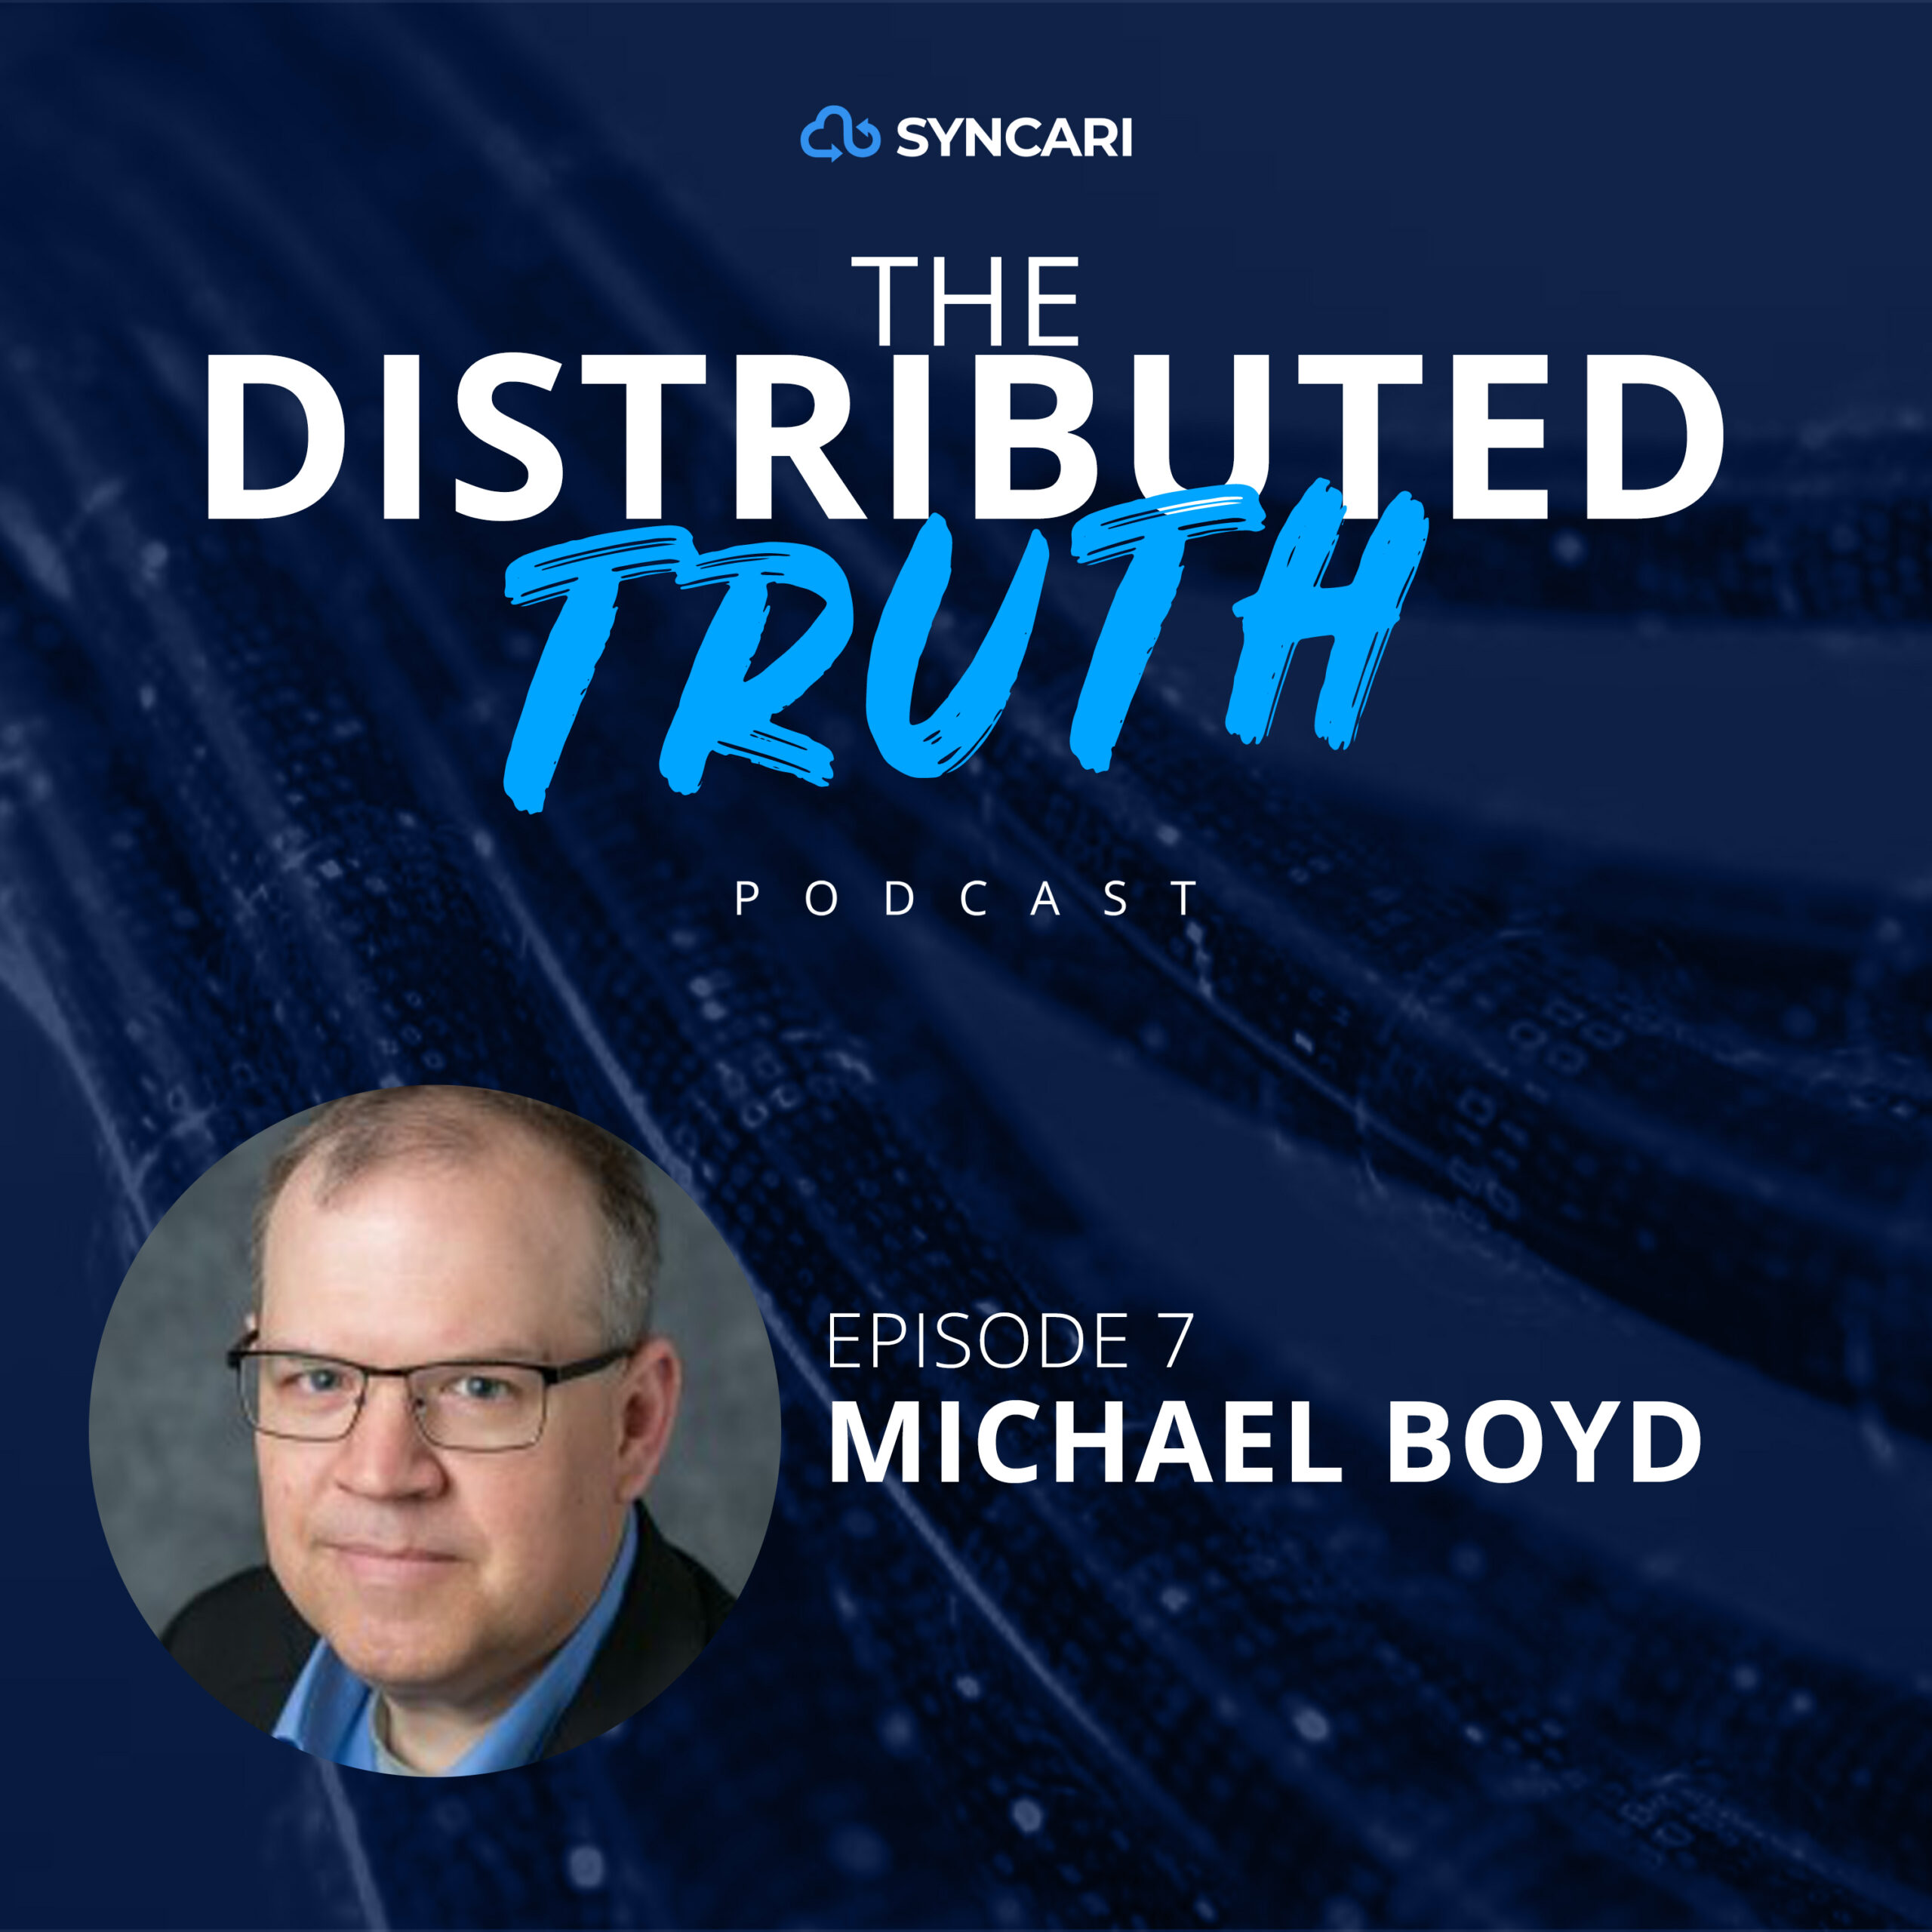 Episode 7: The Distributed Truth with Michael Boyd